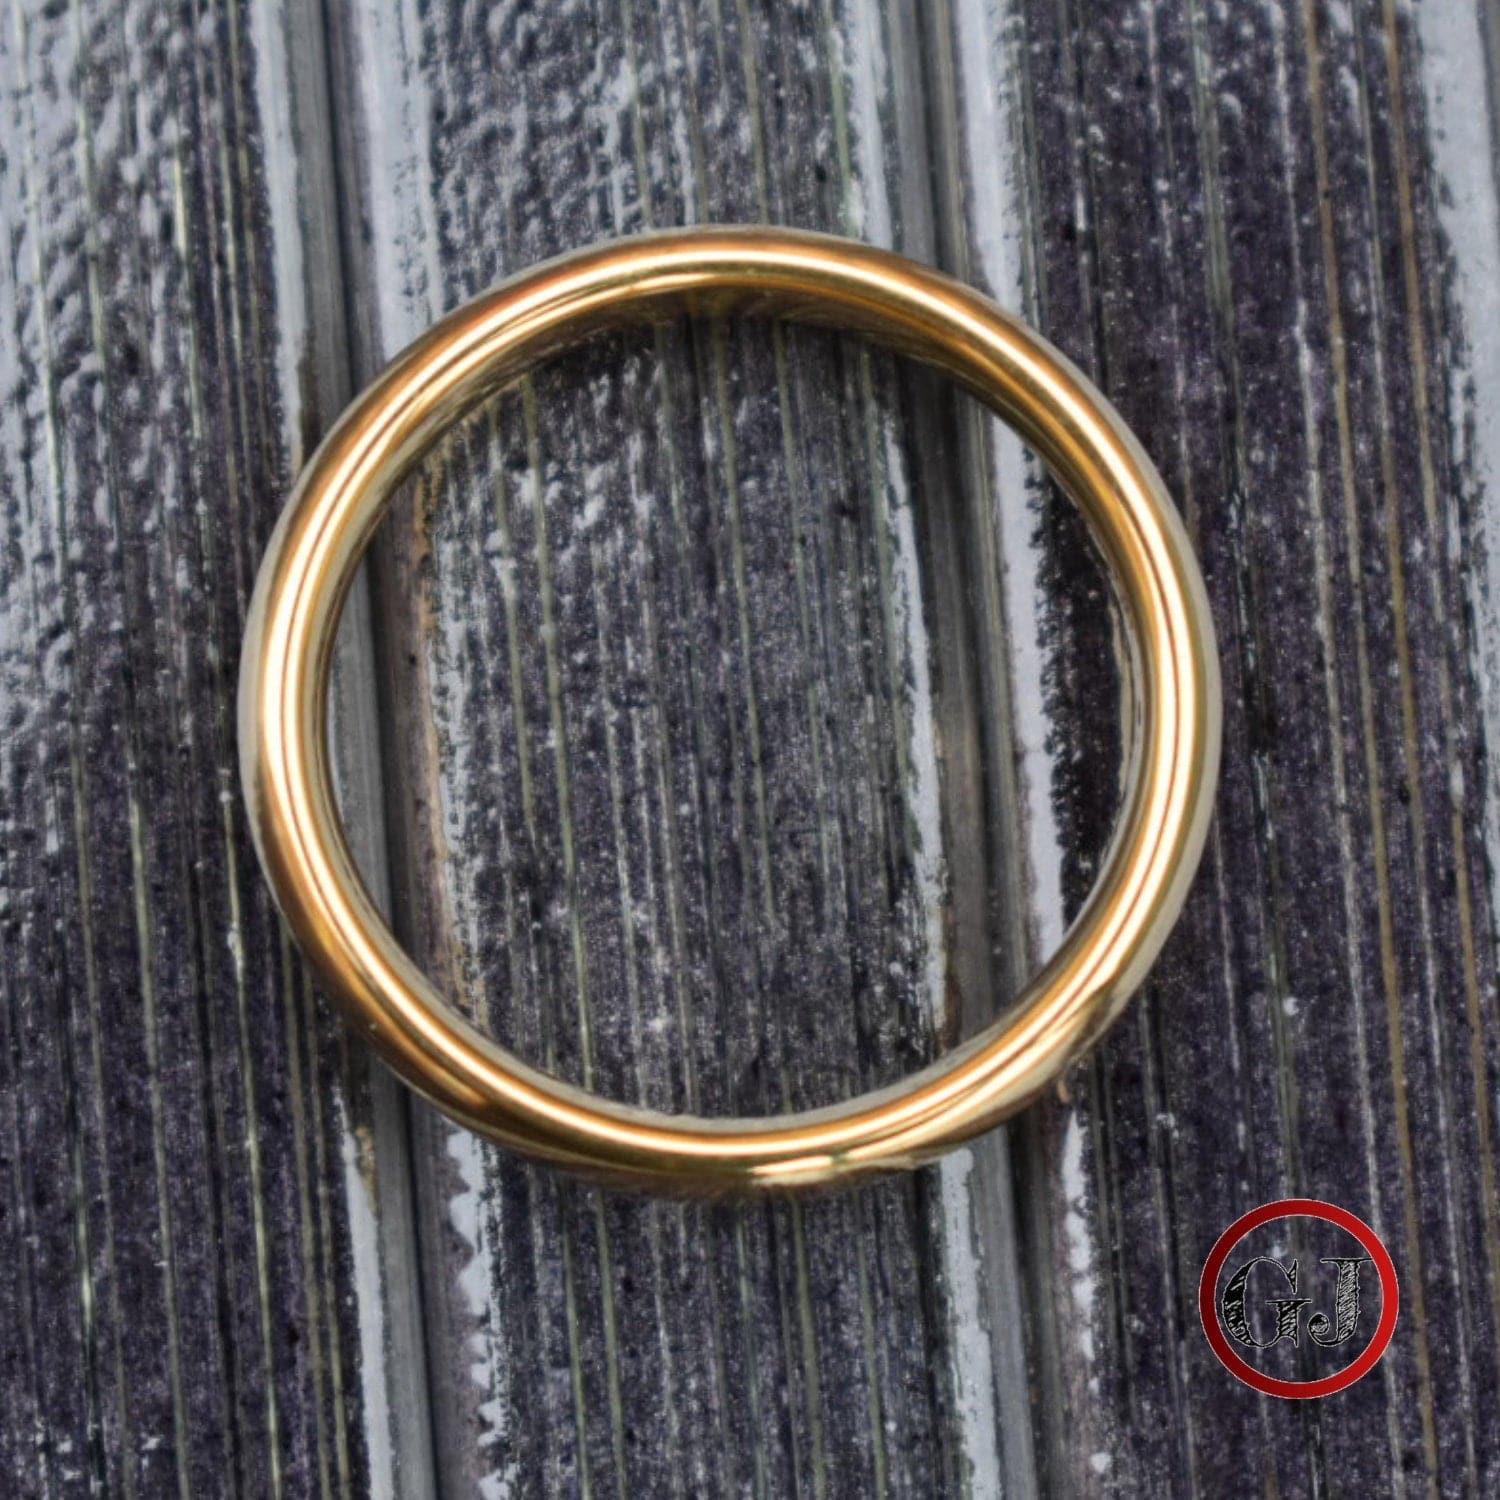 Tungsten Ring 6mm Classic Gold Comfort fit band - Tungsten Titans